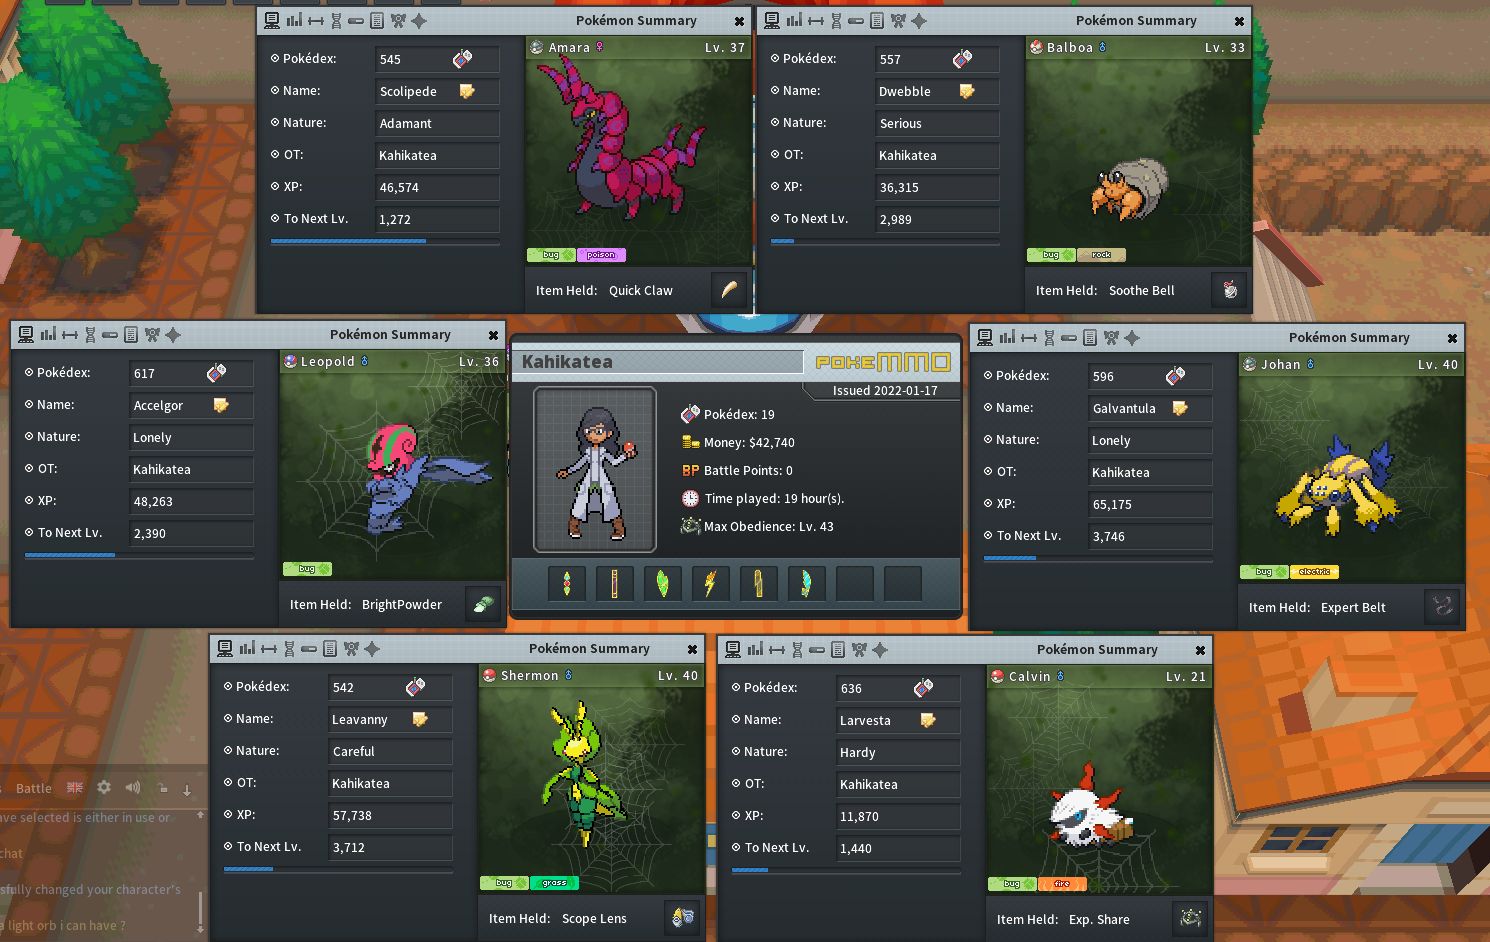 PokeMMO - Hey trainers! Did you know you can find all sorts of